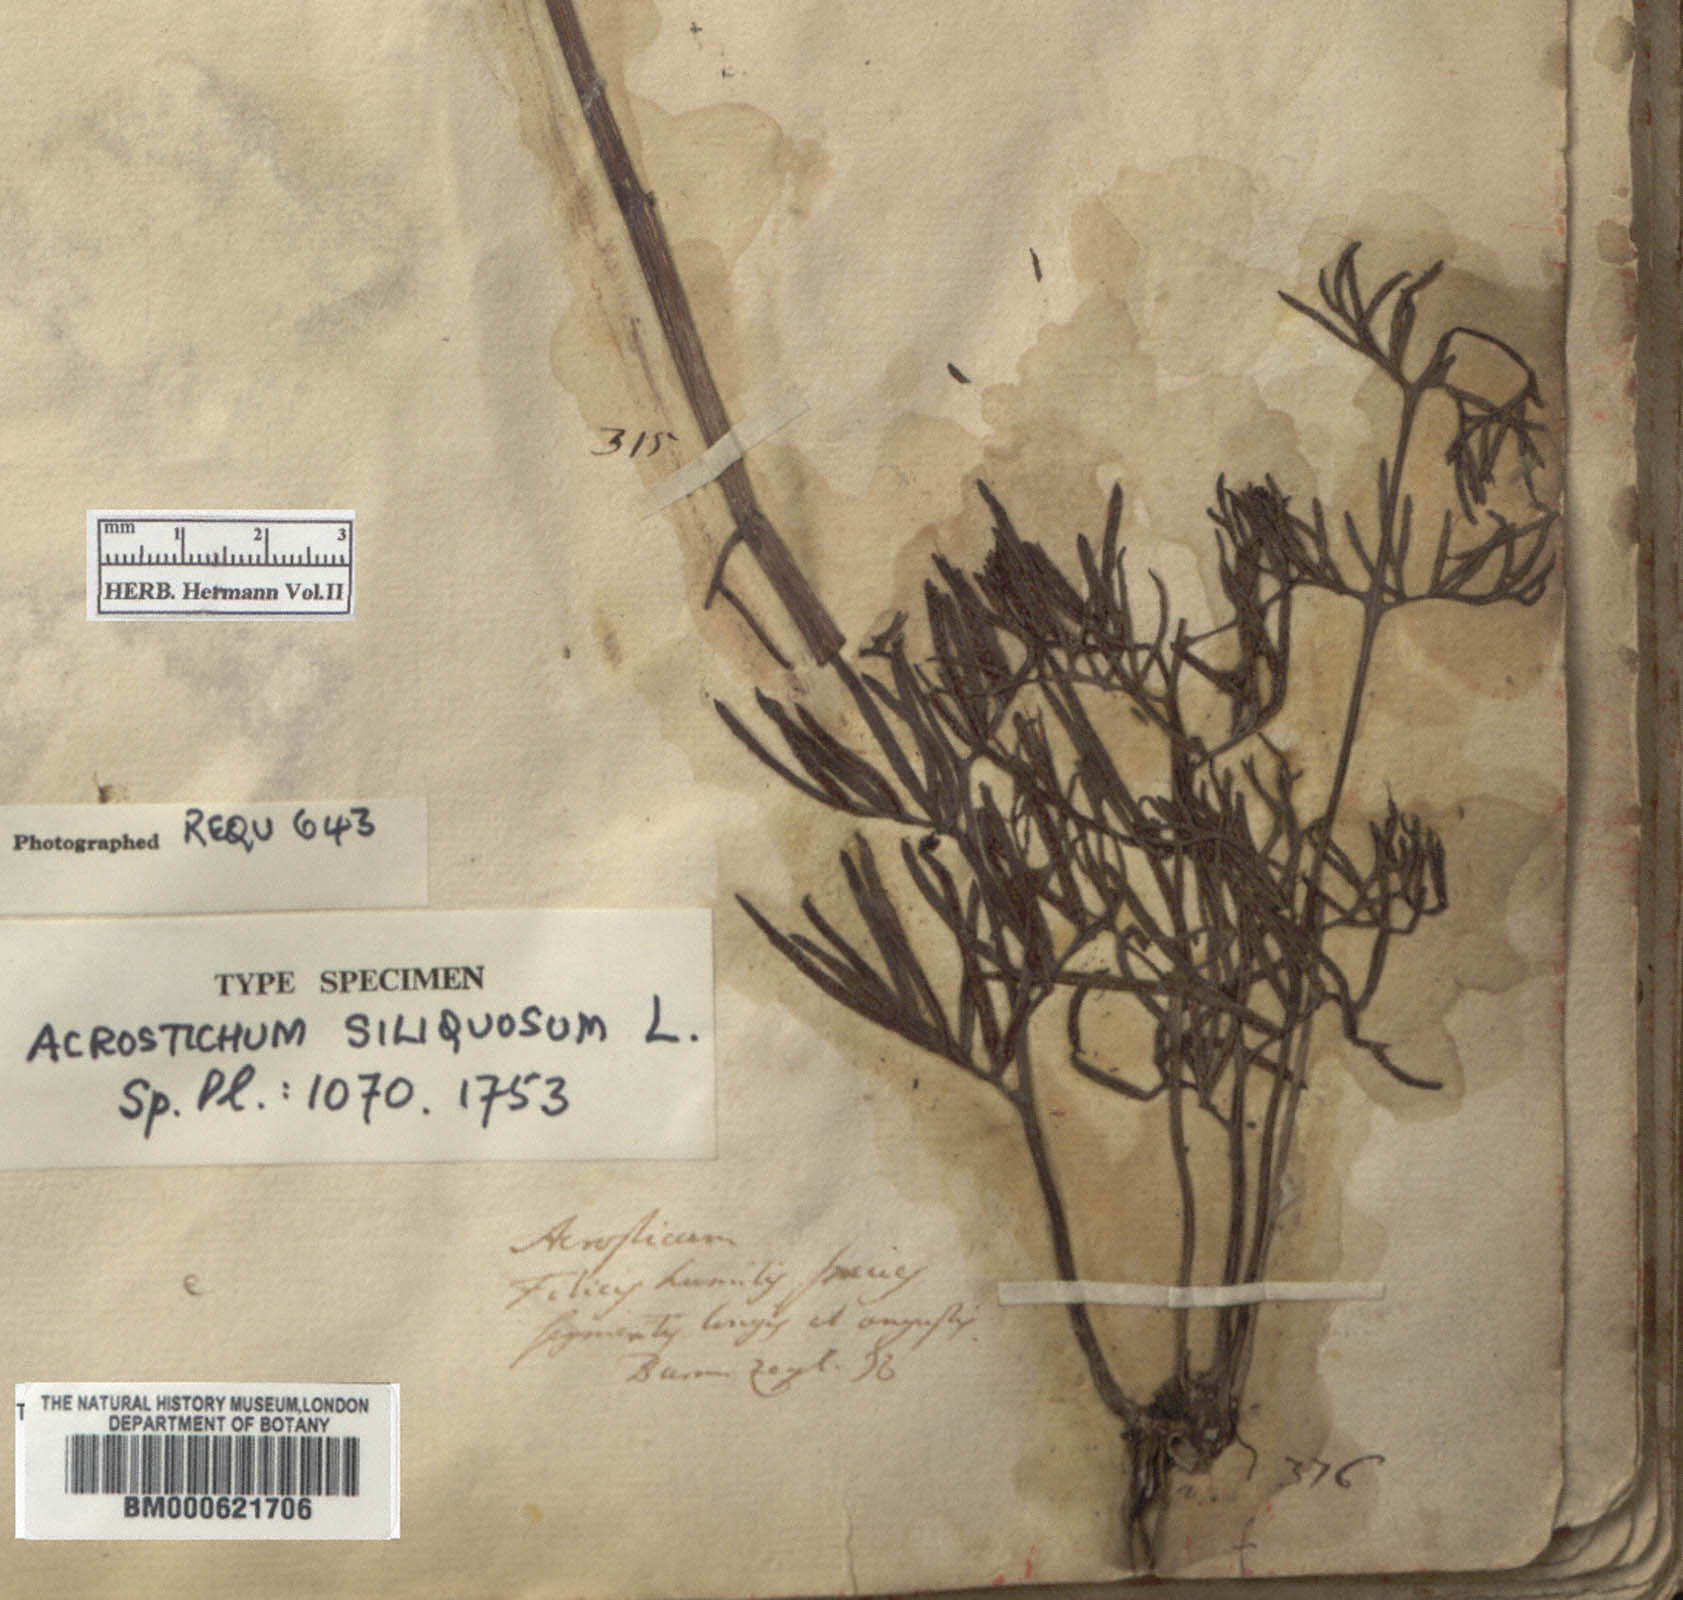 https://www.nhm.ac.uk//resources/research-curation/projects/hermann-herbarium/lgimages/BM000621706.JPG